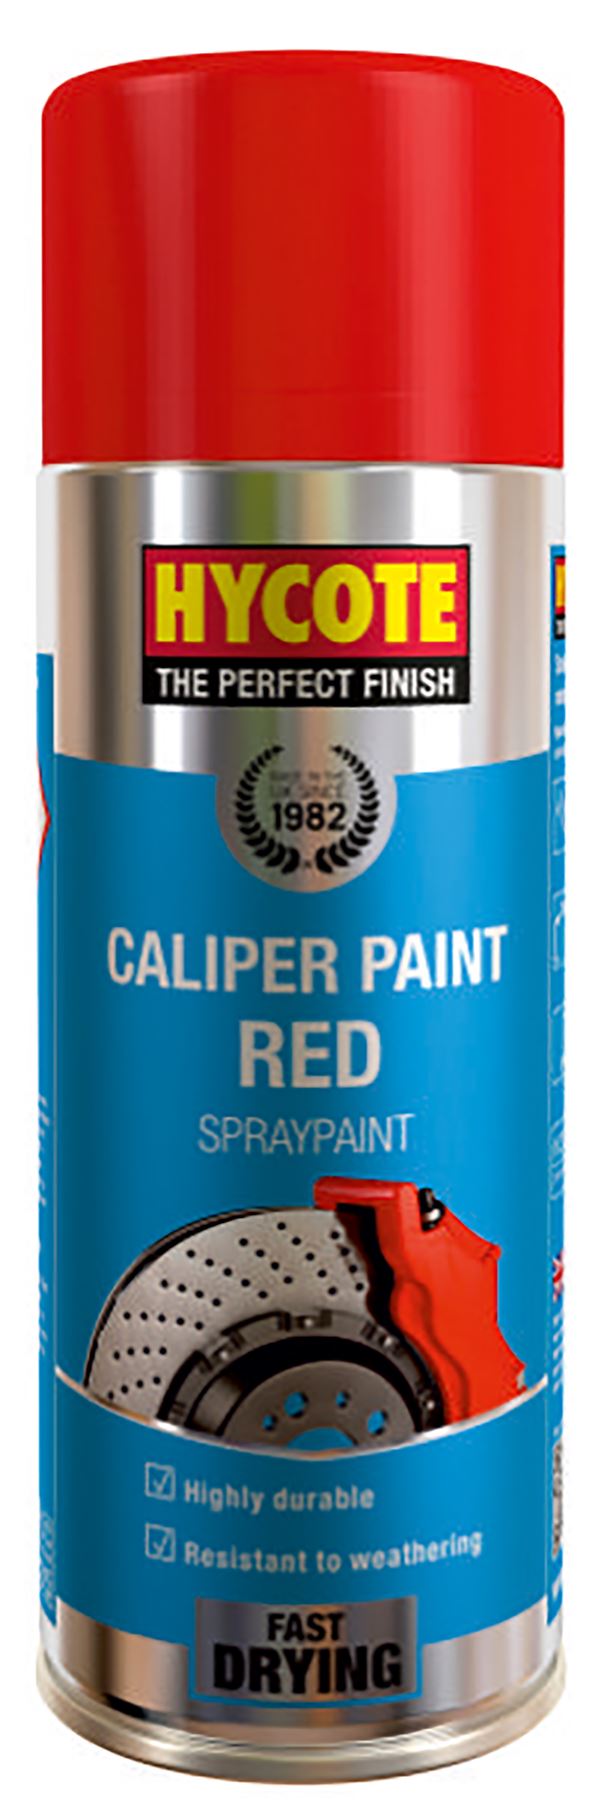 Hycote Red Caliper Paint - 400ml